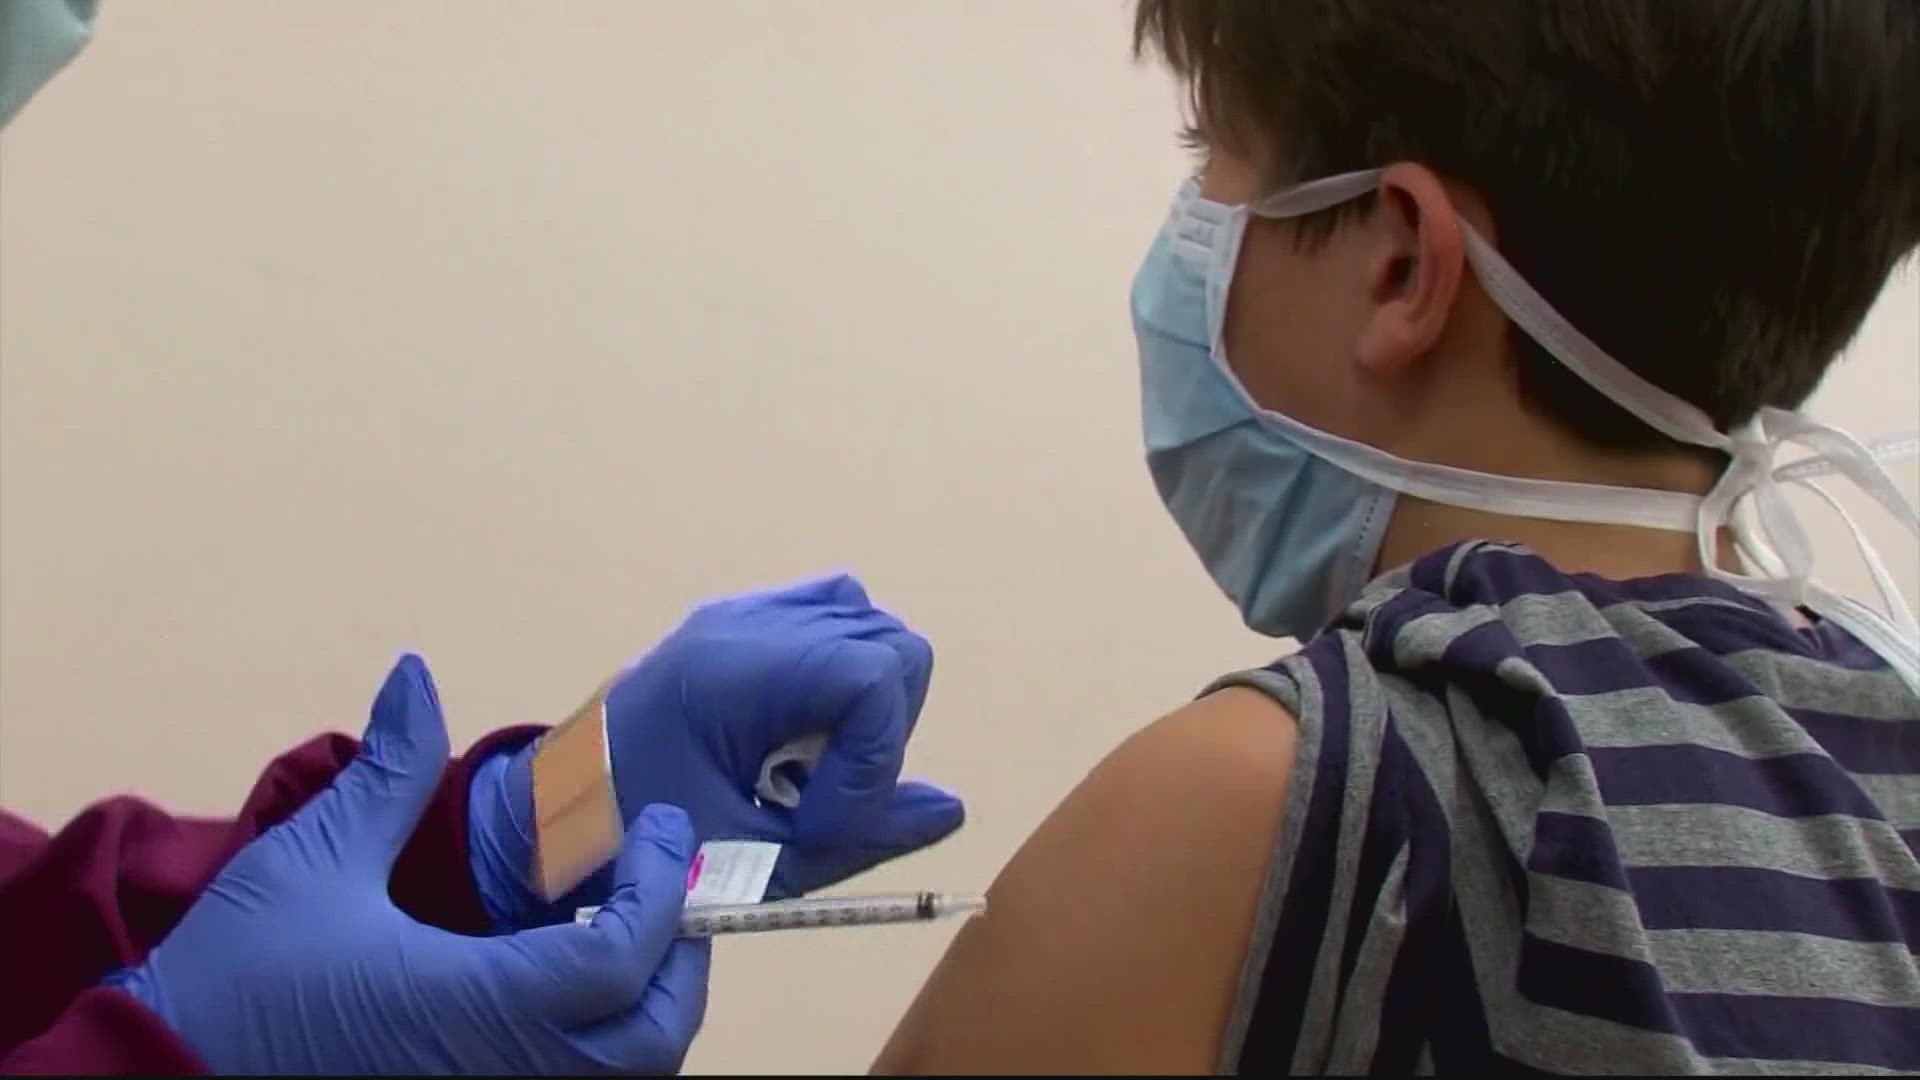 DC plans to fully enforce the "no shots, no school" immunization policy this year.